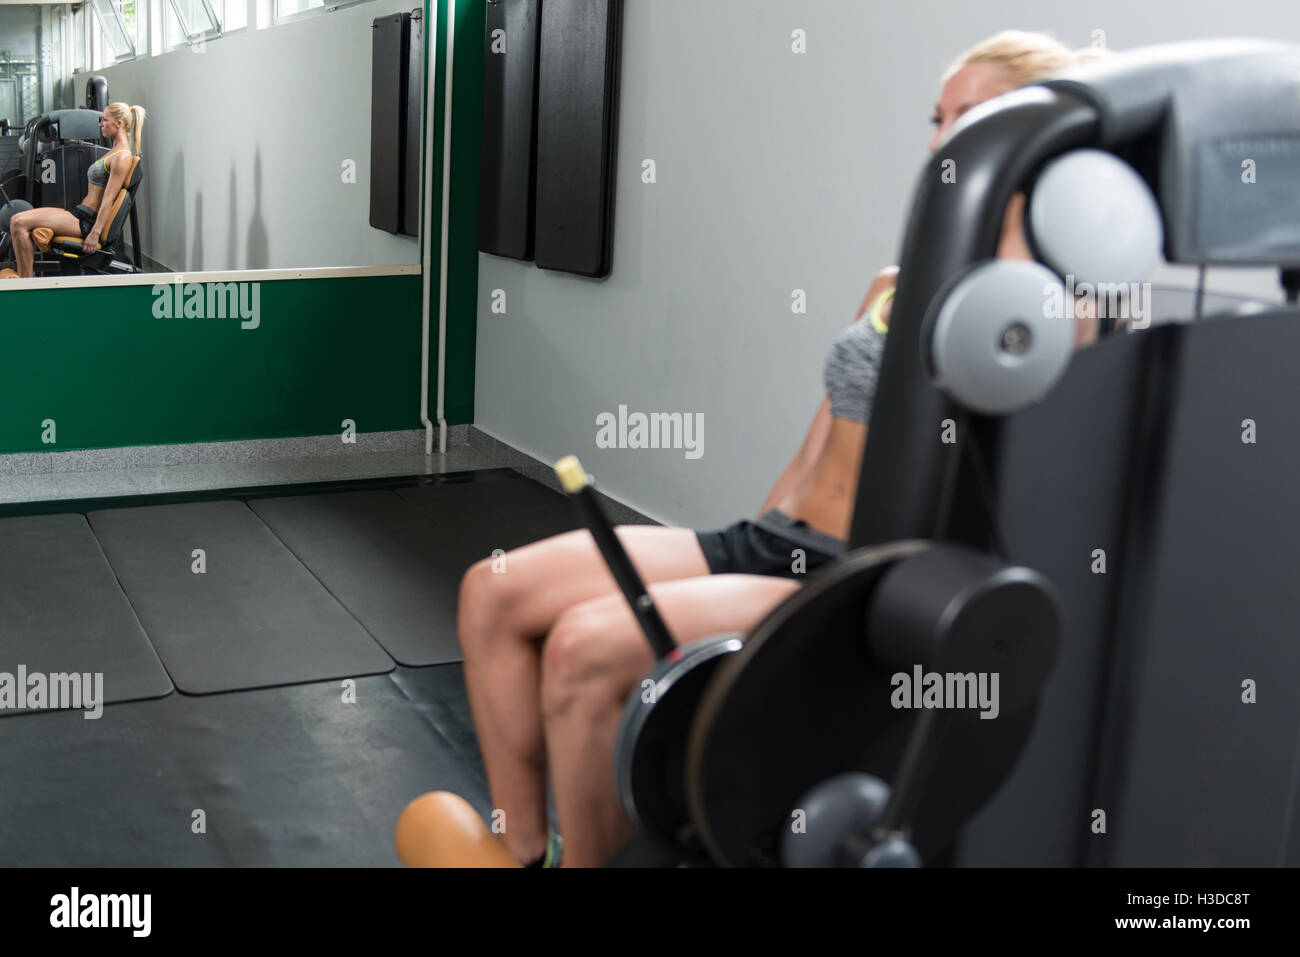 Fitness Woman Working Out Legs On Machine In A Fitness Center